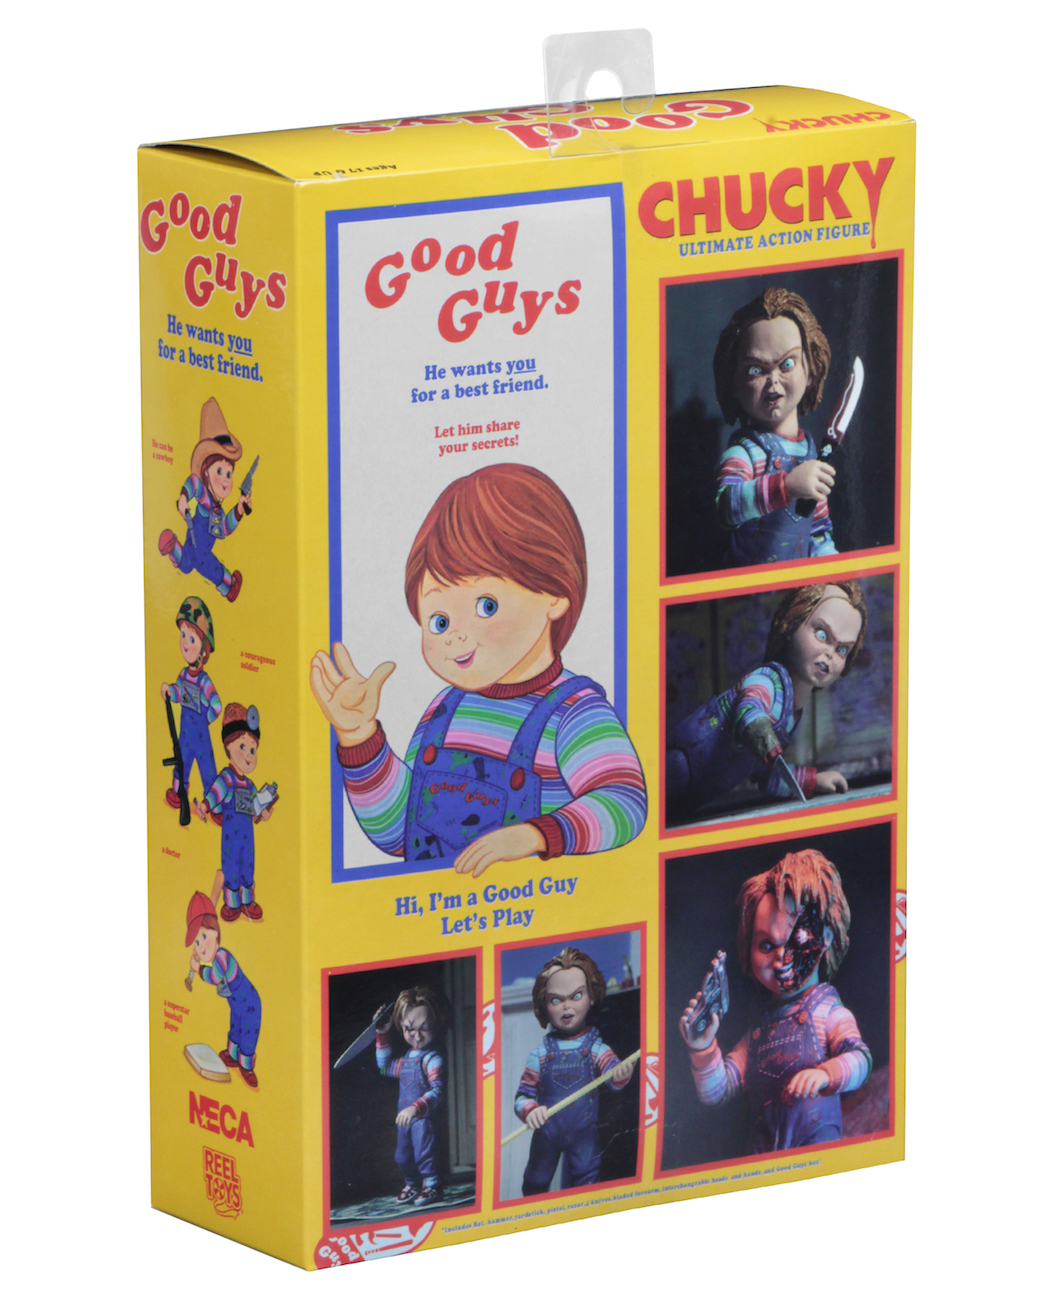 NECA Chucky Good Guy Doll Child's Play Ultimate 4" Action Figure 1:12 Scale NIB 